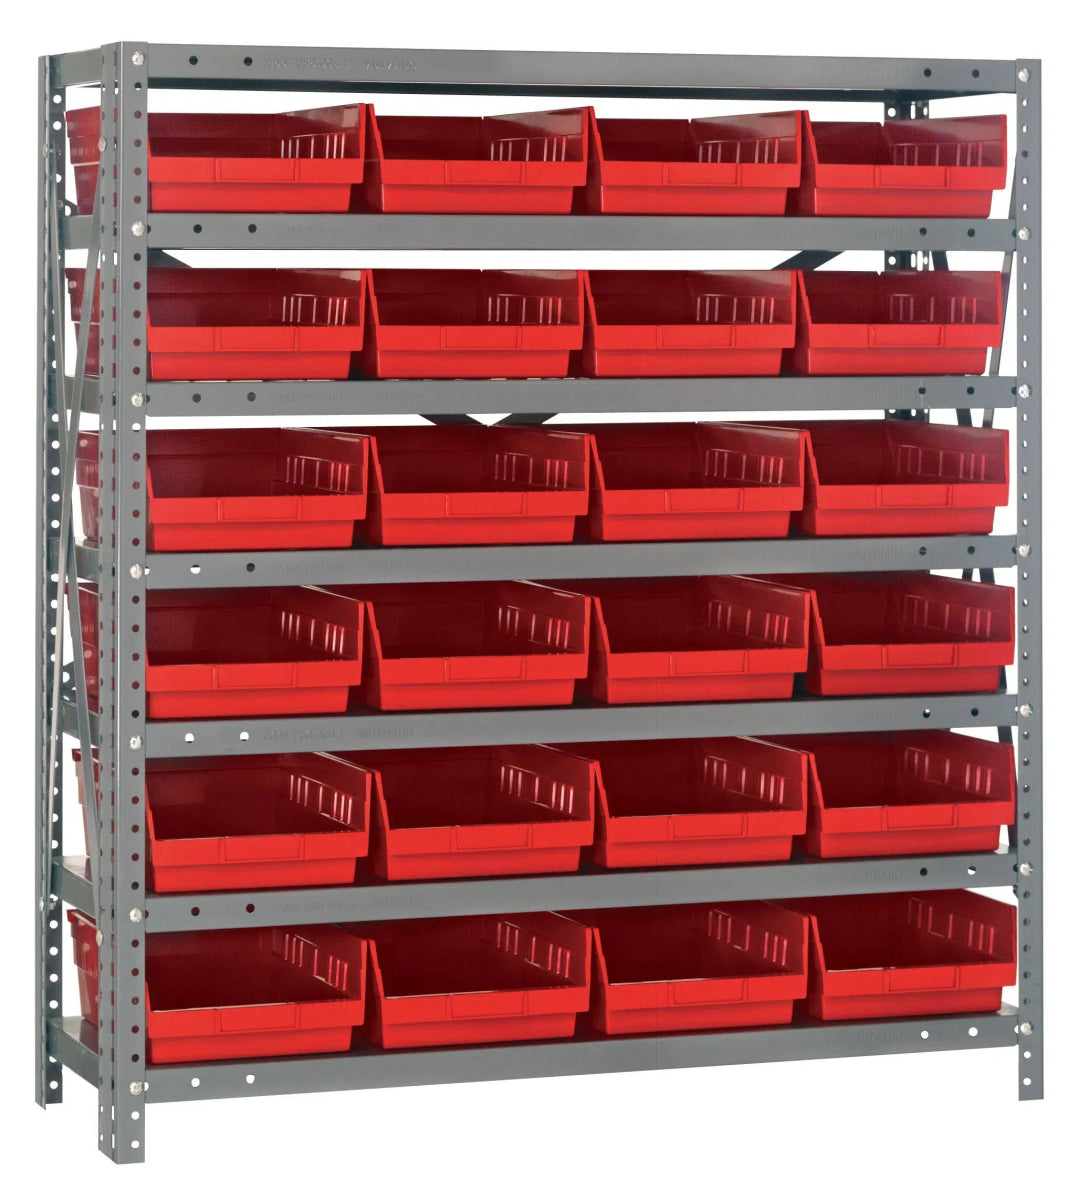 Shelving with Bins - Industrial 4 Less